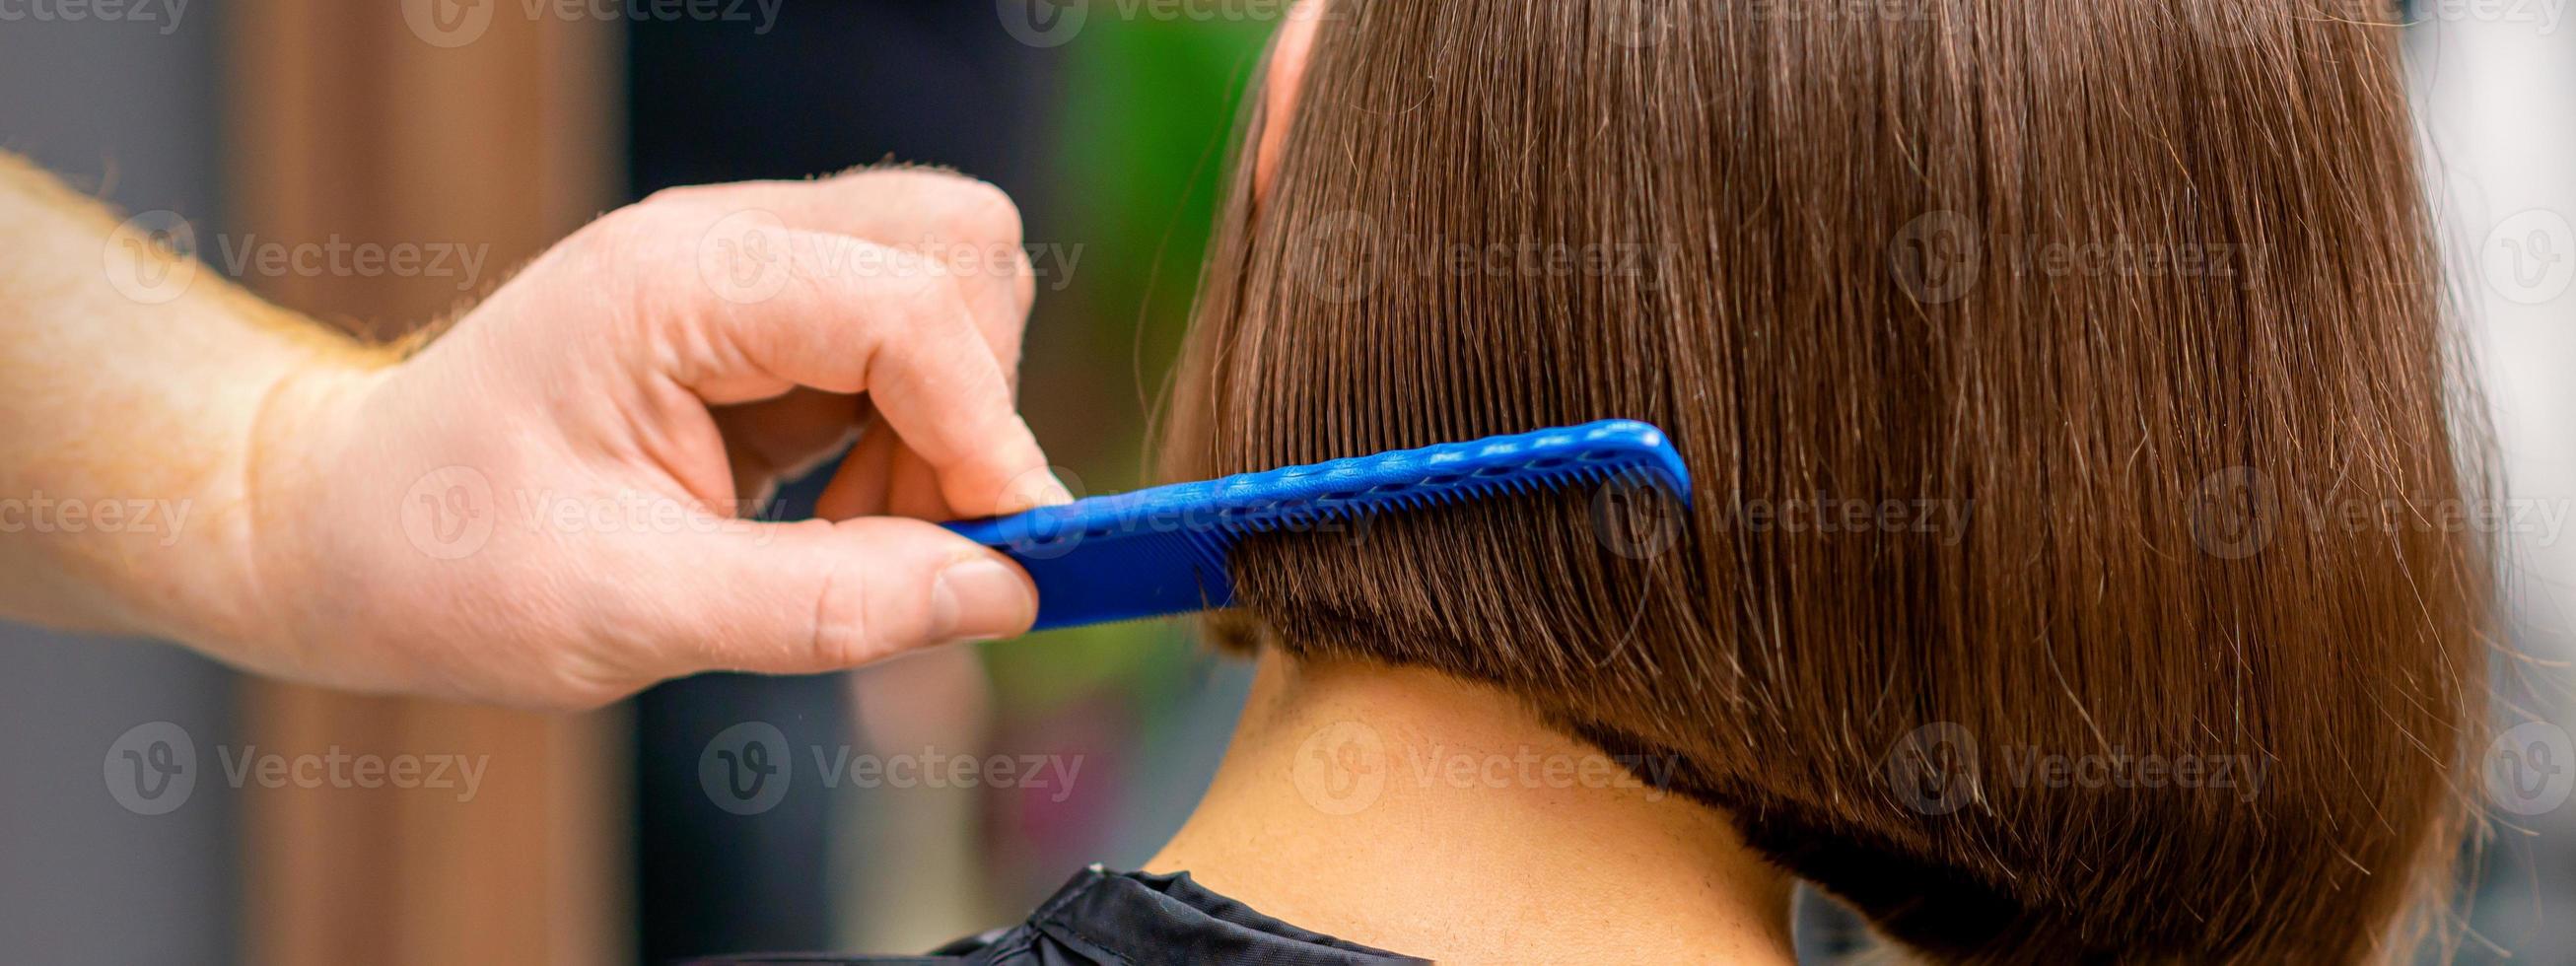 Hairdresser combing hair of woman photo